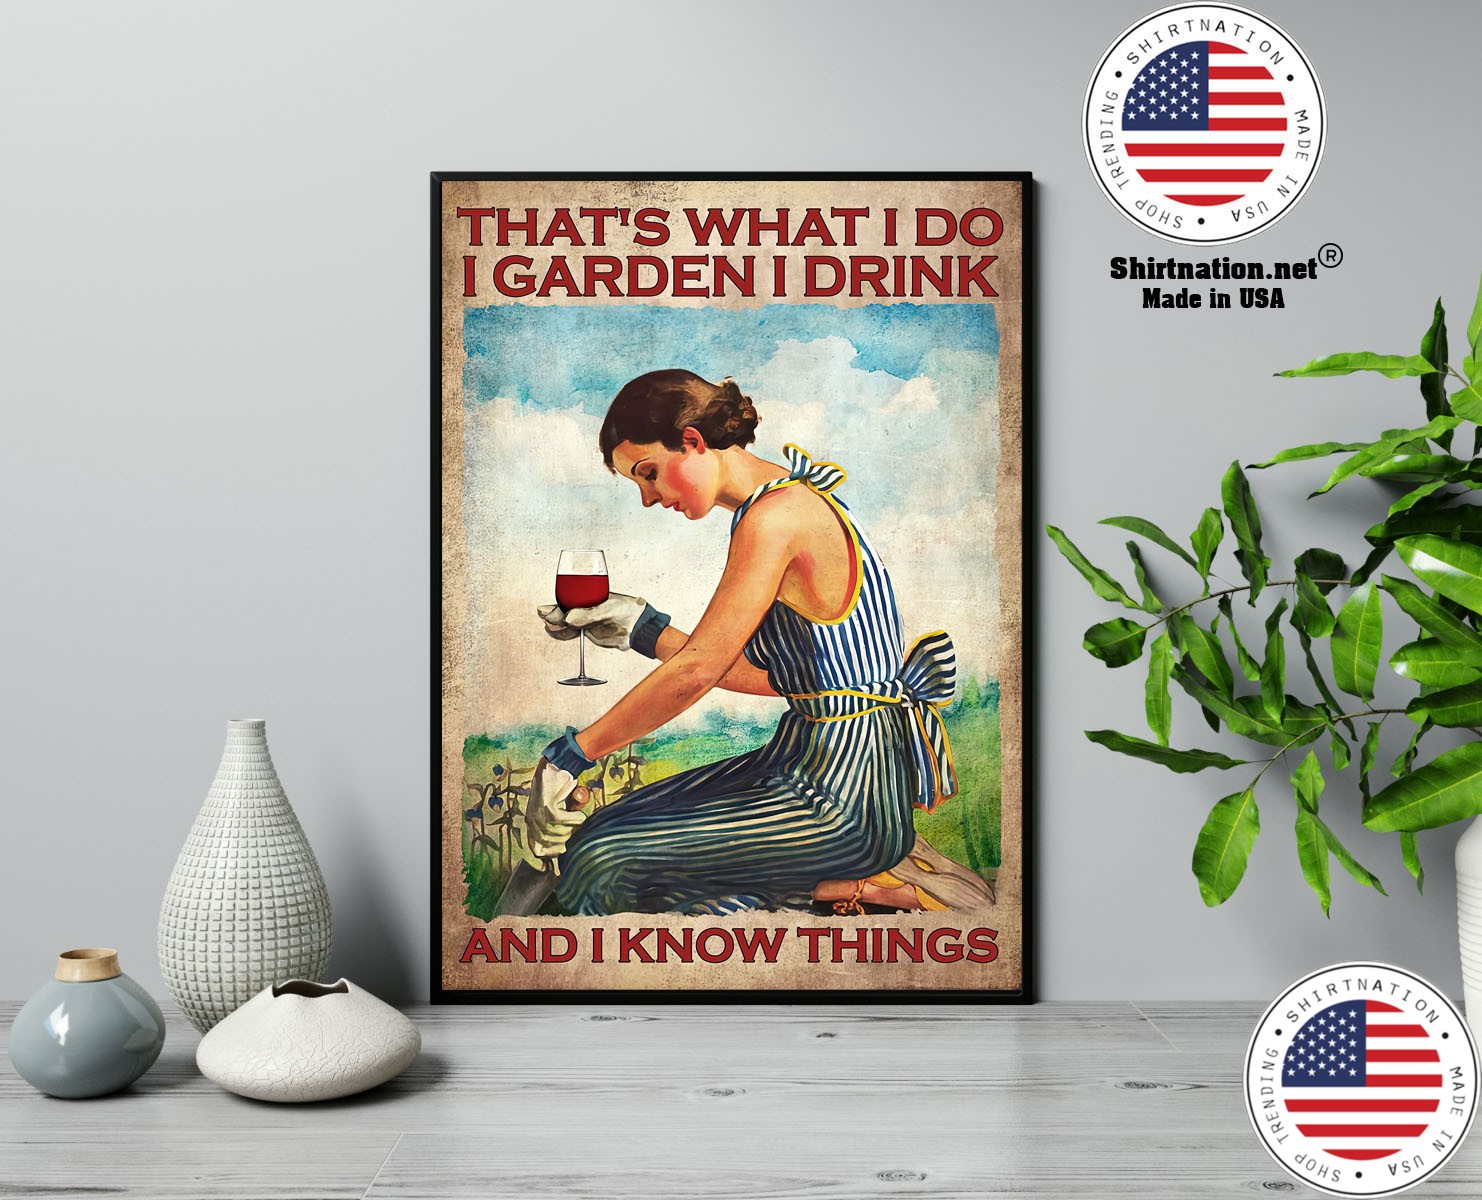 Wine Thats what I do I garden I drink and I know things poster 13